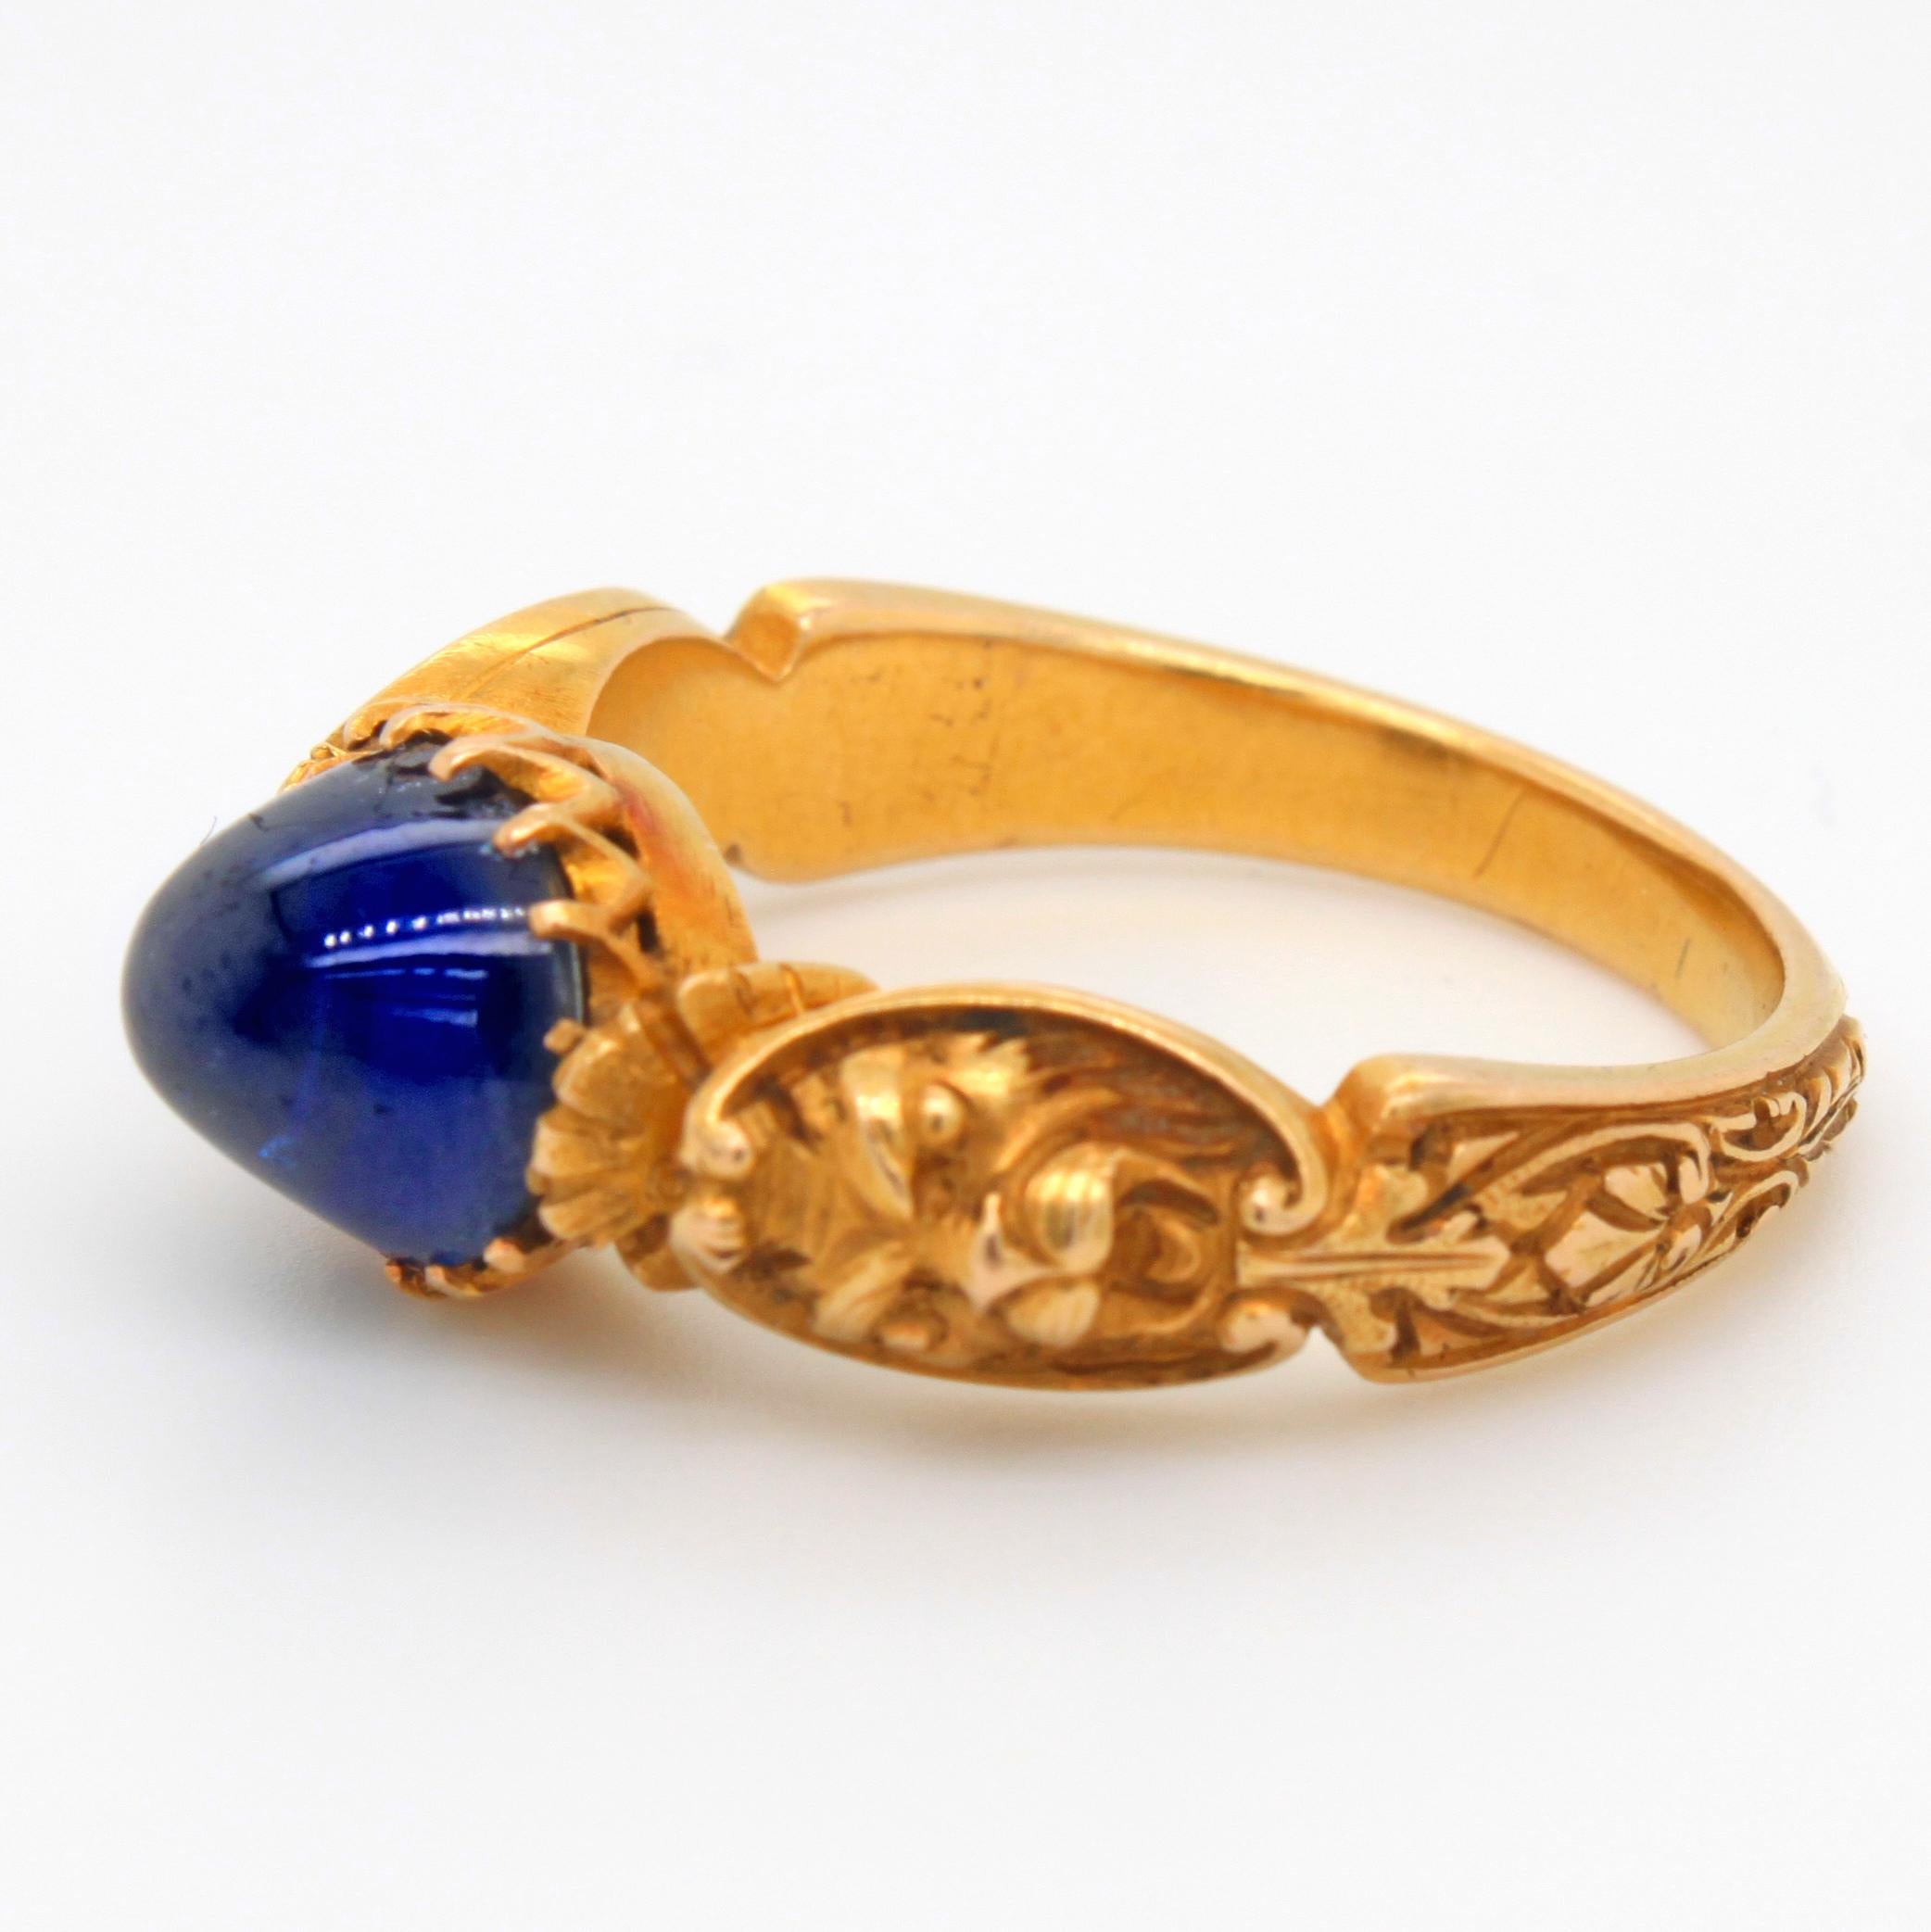 An antique Neo-Renaissance sapphire and gold ring. ca. 1840s. The sapphire cabochon weighs approximately 3.7 carats, is natural (not heat treated) and has a deep royal blue colour. It has some abrasions/feathers and the inclusions show signs of